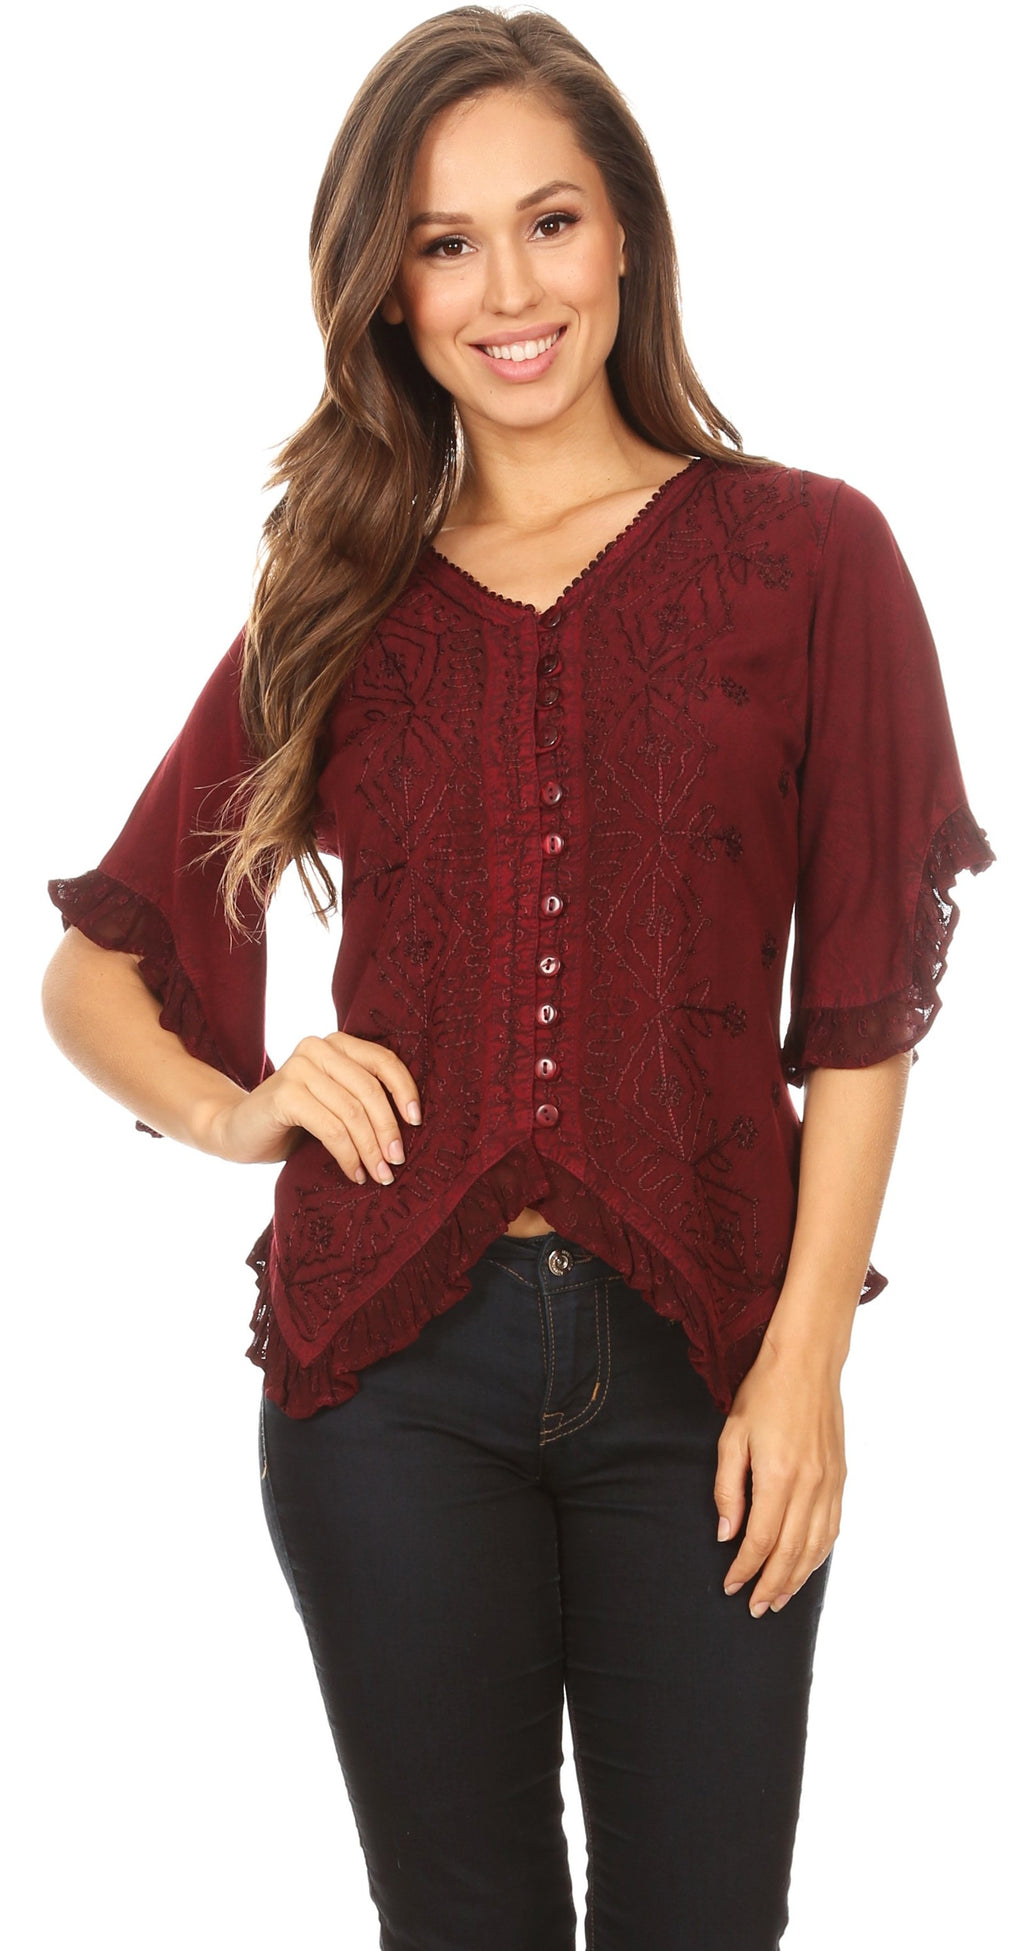 Sakkas Adela Womens 3/4 Sleeve V neck Lace and Embroidery Top Blouse w